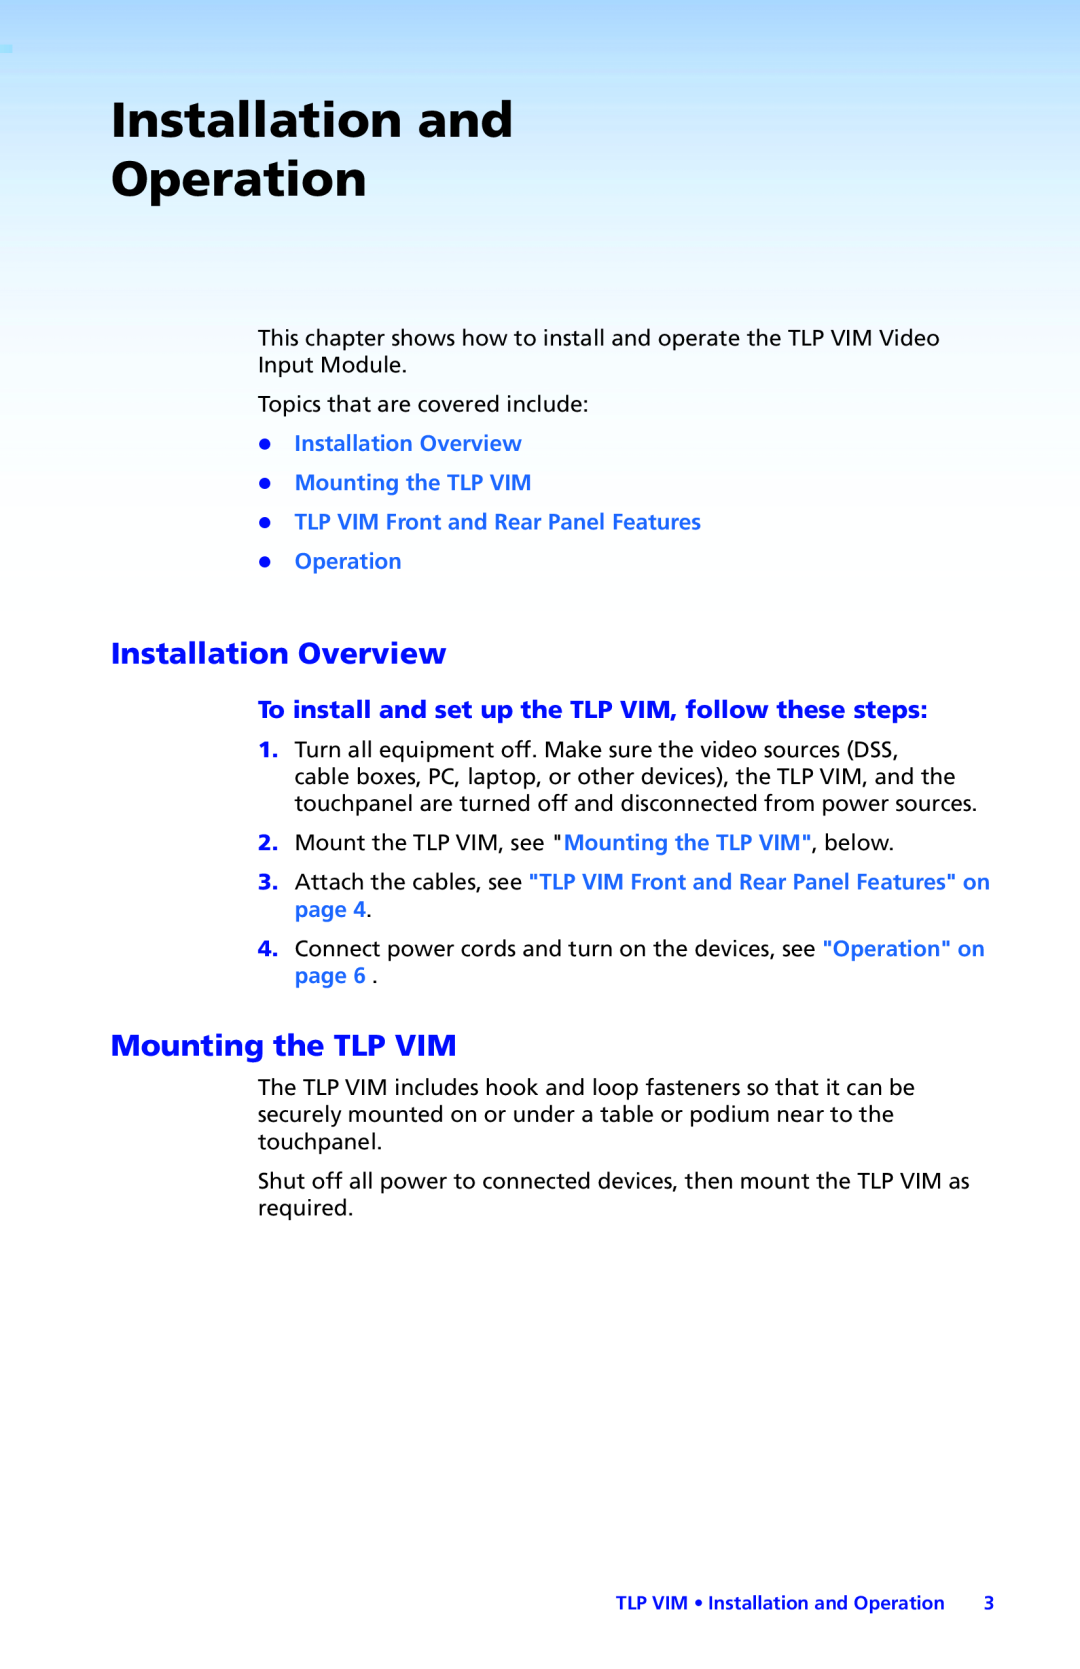 Extron electronic manual Installation and Operation, Installation Overview, Mounting the TLP VIM 